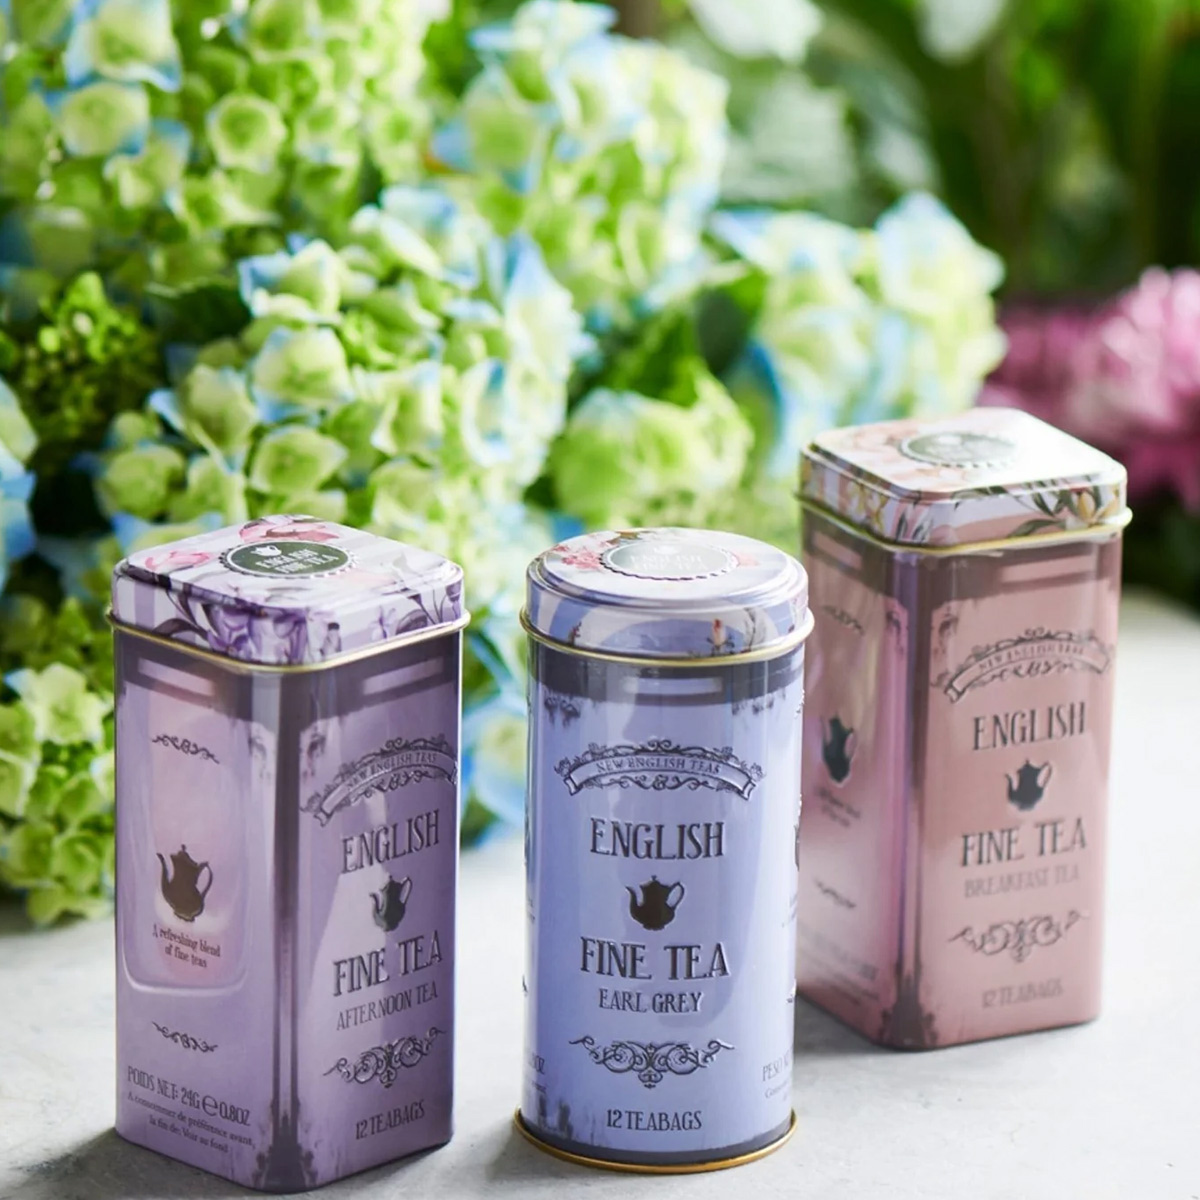 New English Teas Floral Selection Tea Tins Gift with Teabags